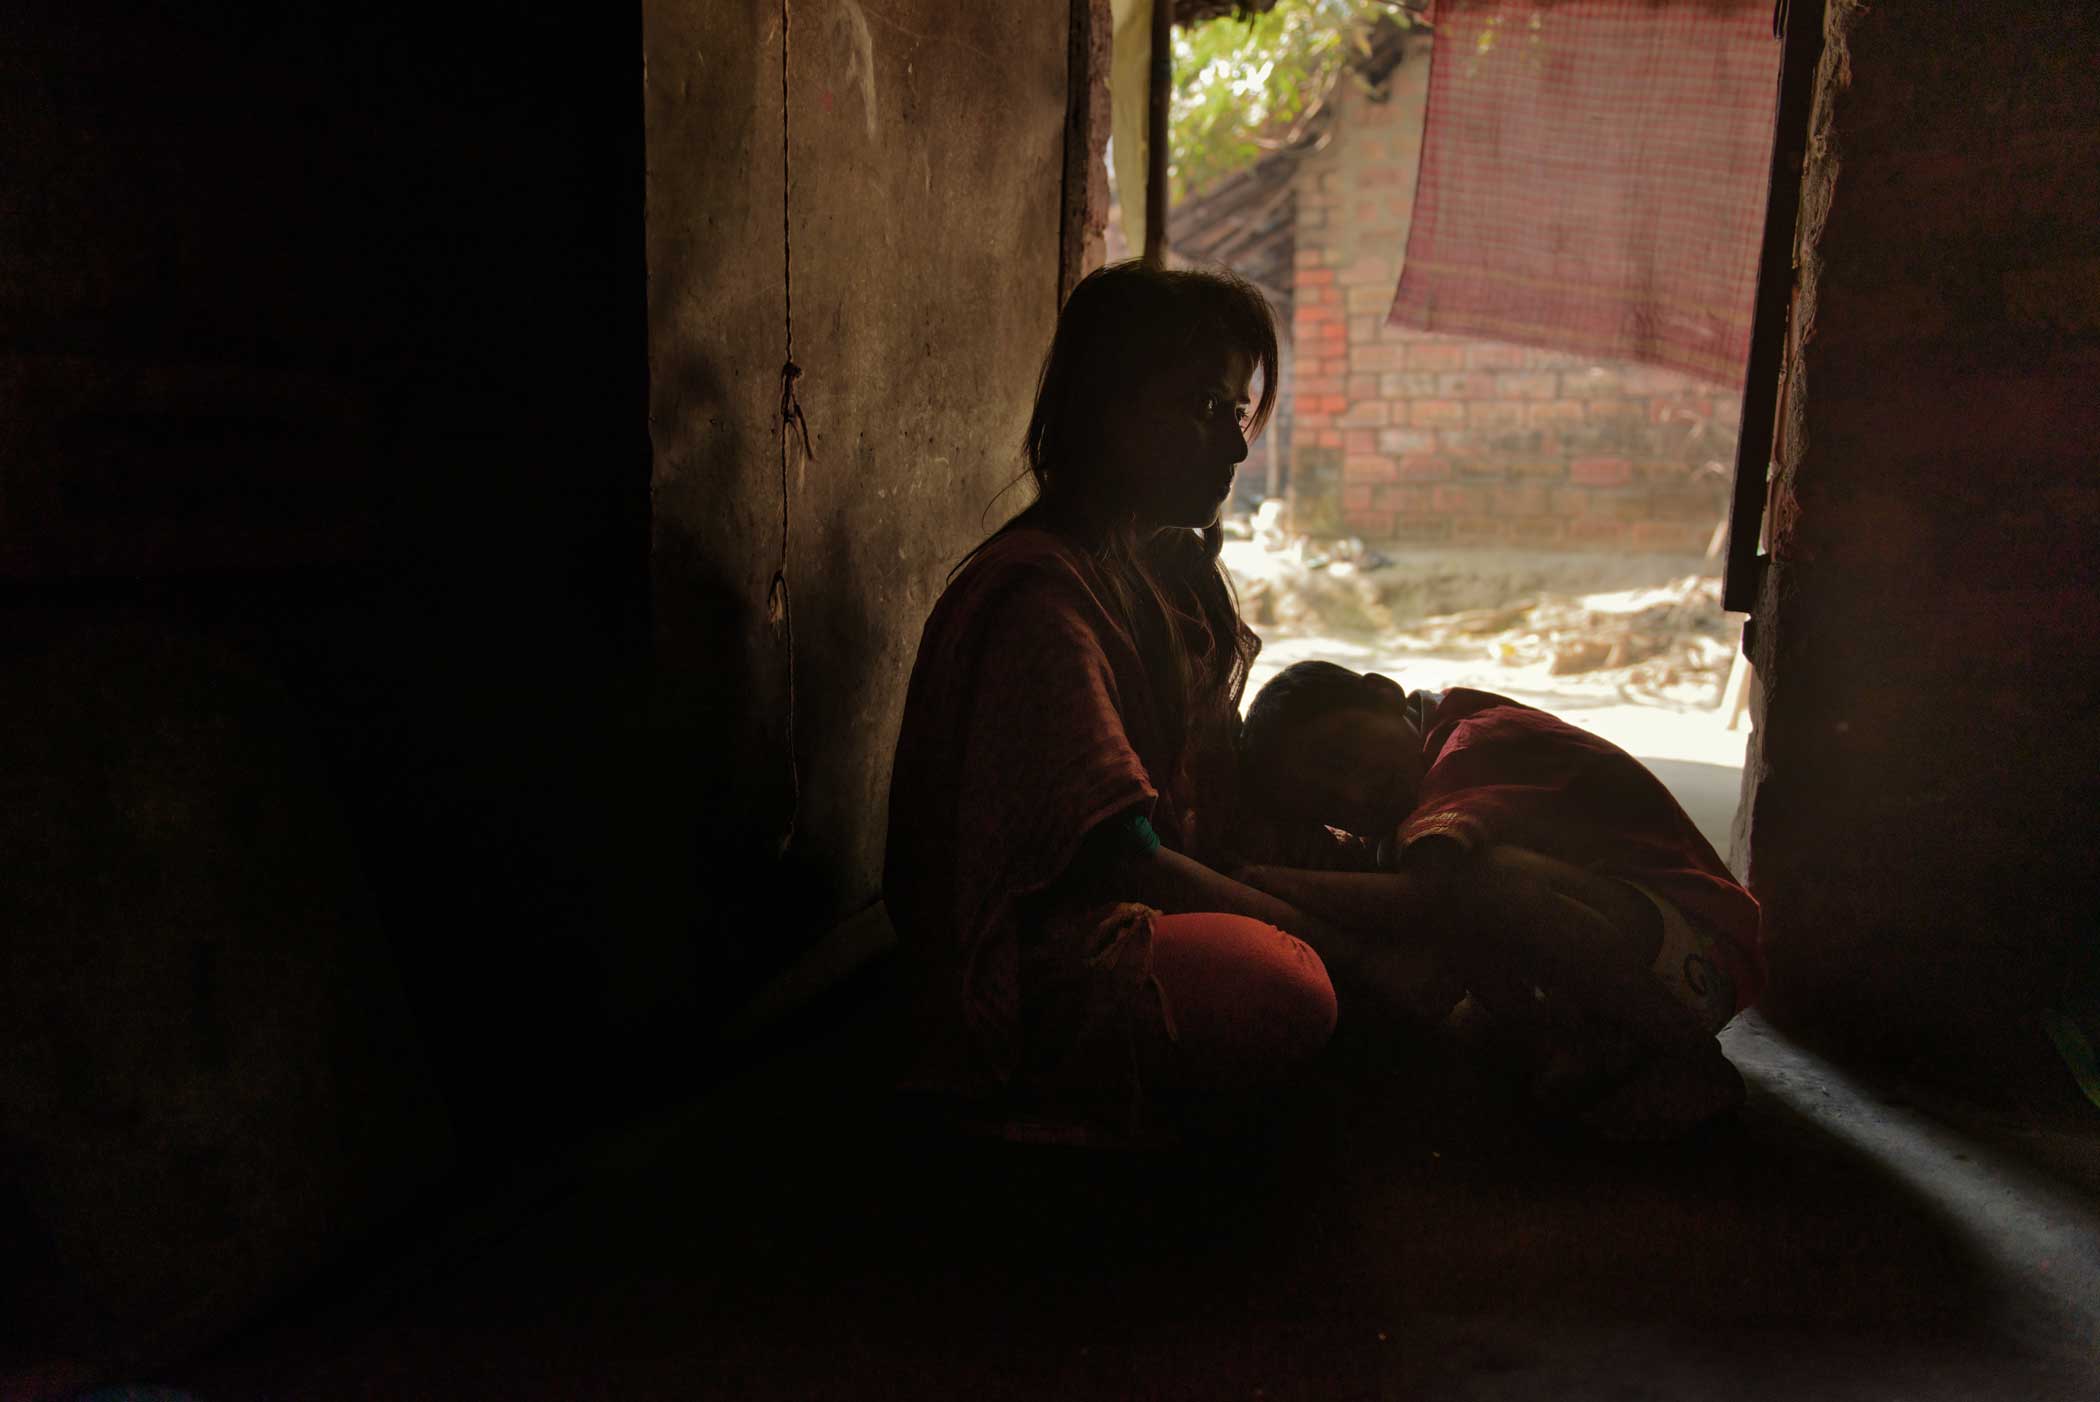 Kalpana (17) with her five-year-old son. Kalpana , was raped by her landlord’s son in 2008. Kalpana remained silent out of shame and fear. After becoming pregnant from the rape, Kalpana’s mother threw her out of the house. She was later pressured to marry her rapist by a local political party. Kalpana refused to withdraw the case or marry him. Originally from a suburb, she now lives in Kolkata with her son. (Smita Sharma)